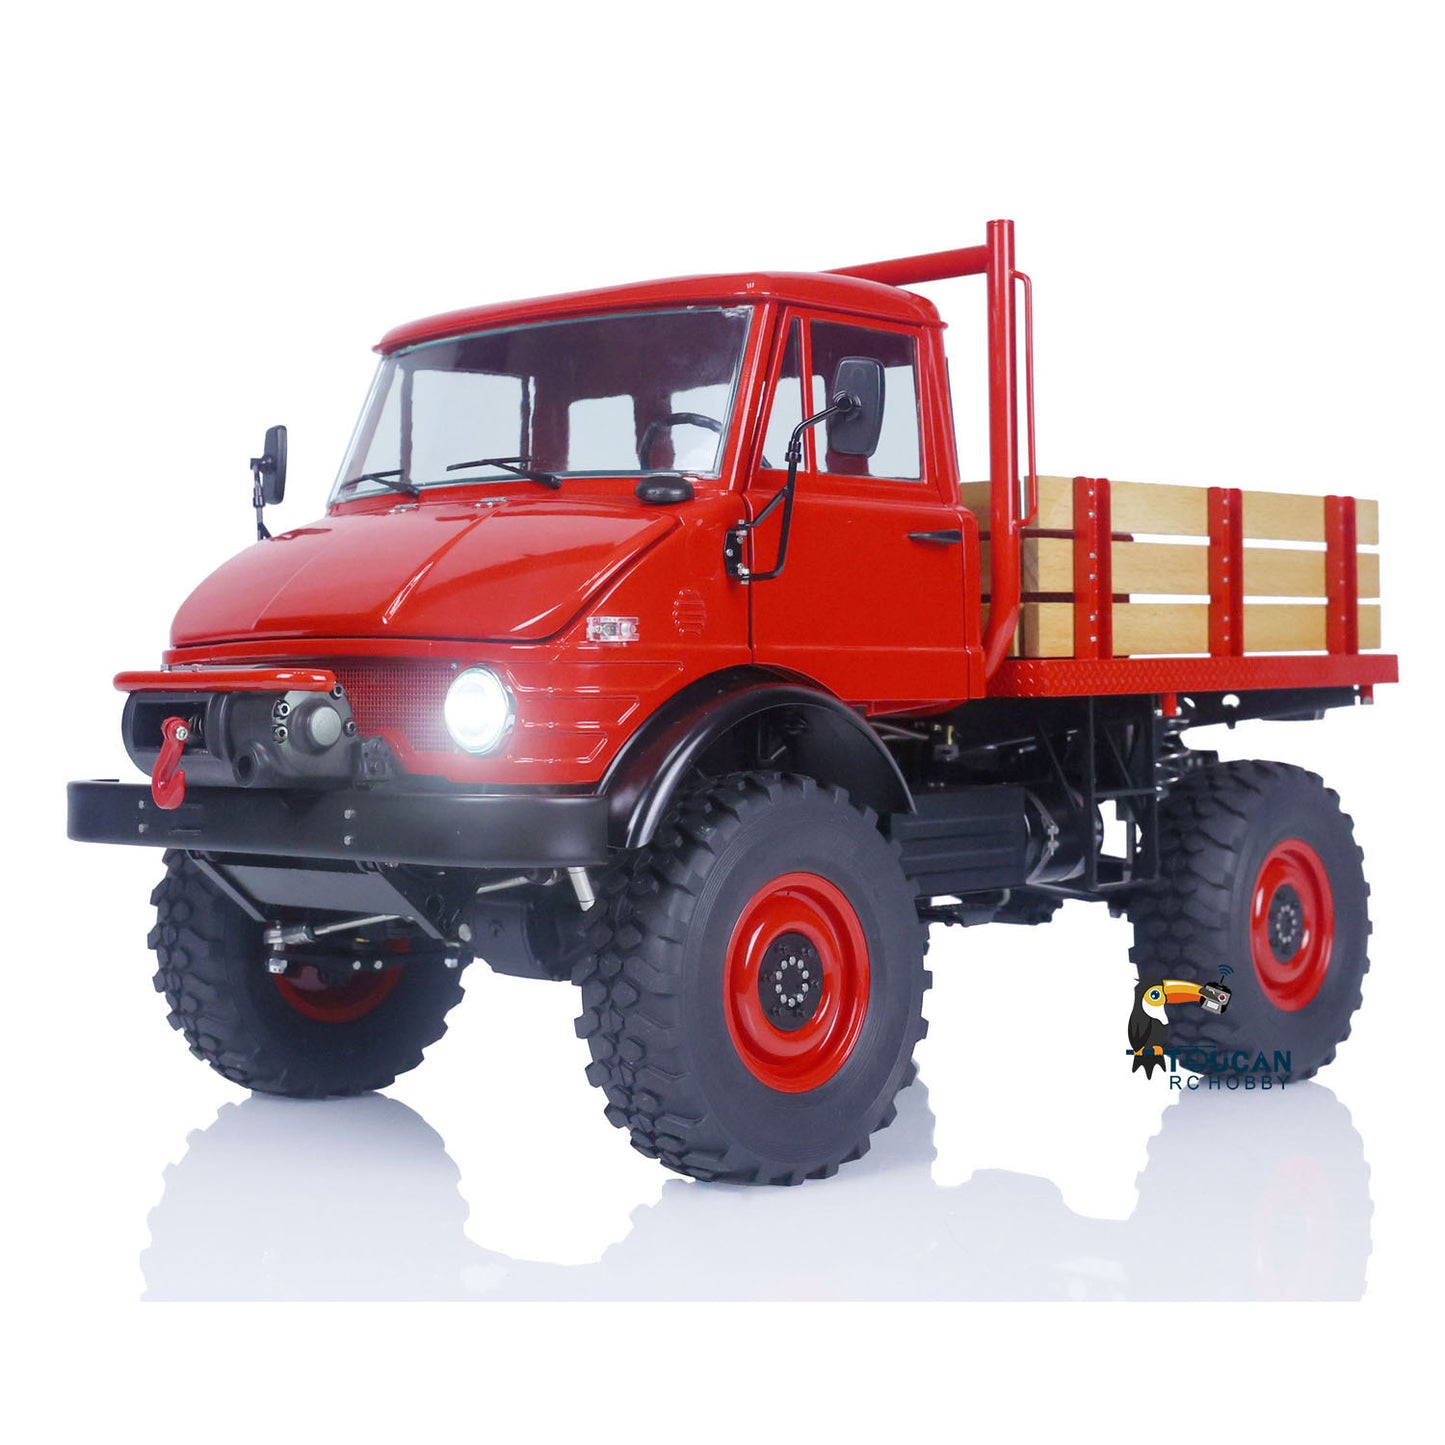 LESU 1/10 4*4 RC Off-Road Vehicle Painted Assembled U406 Truck Radio Control Car 2 Speed Transmission Winch Hobby Model